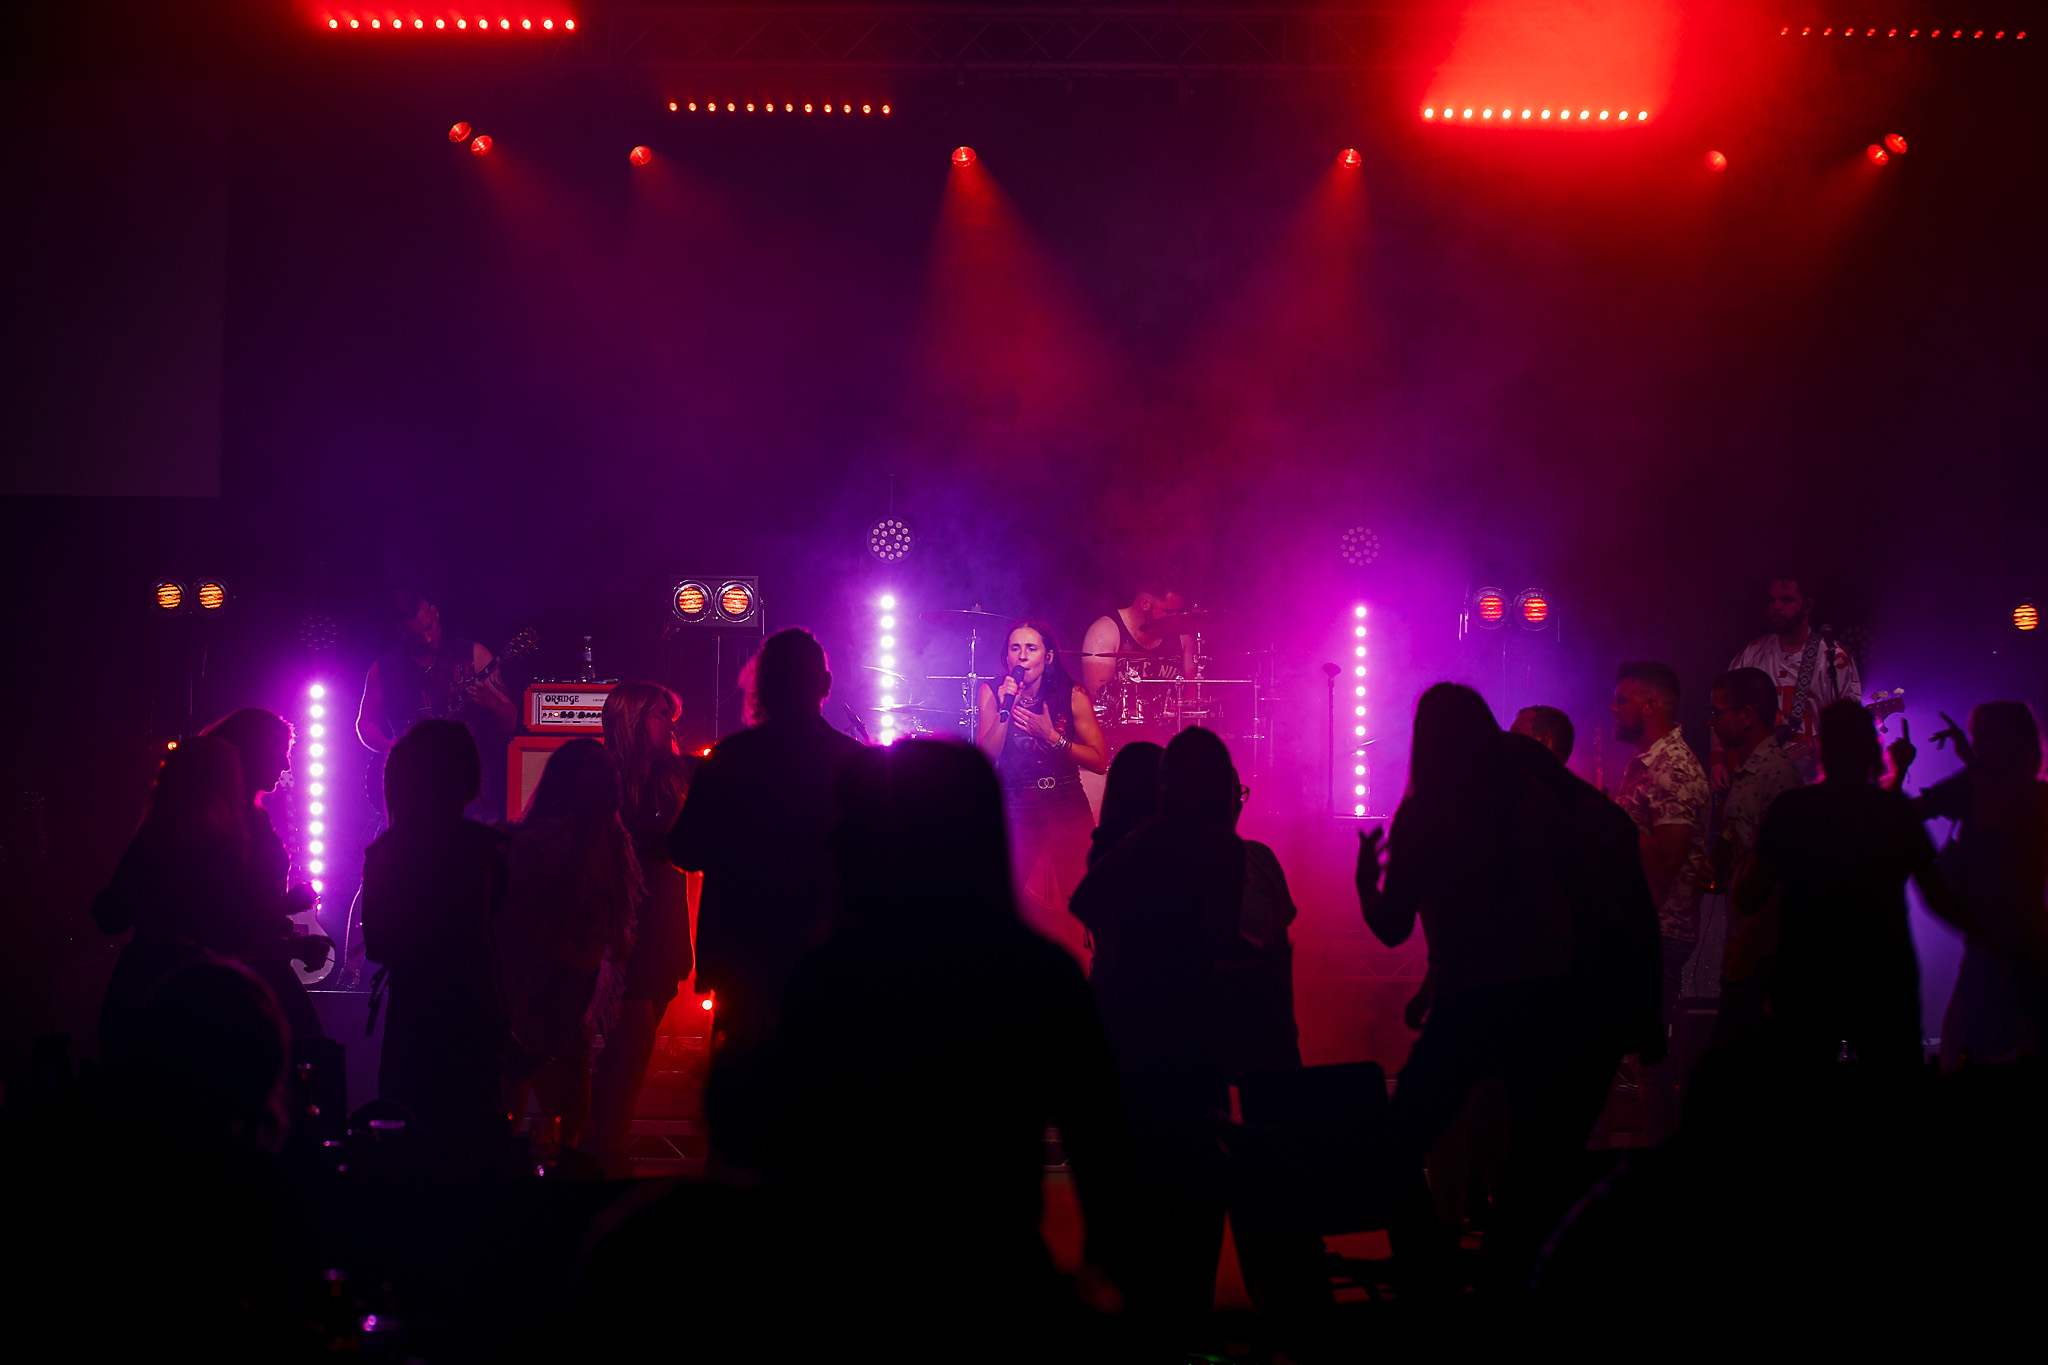 Just a taster of what Eastbourne Music Fest events are like - Bringing Together The Best Live Cover Bands To Create An Unforgettable Immersive Music Experience. #Eastbourne Music Fest Events